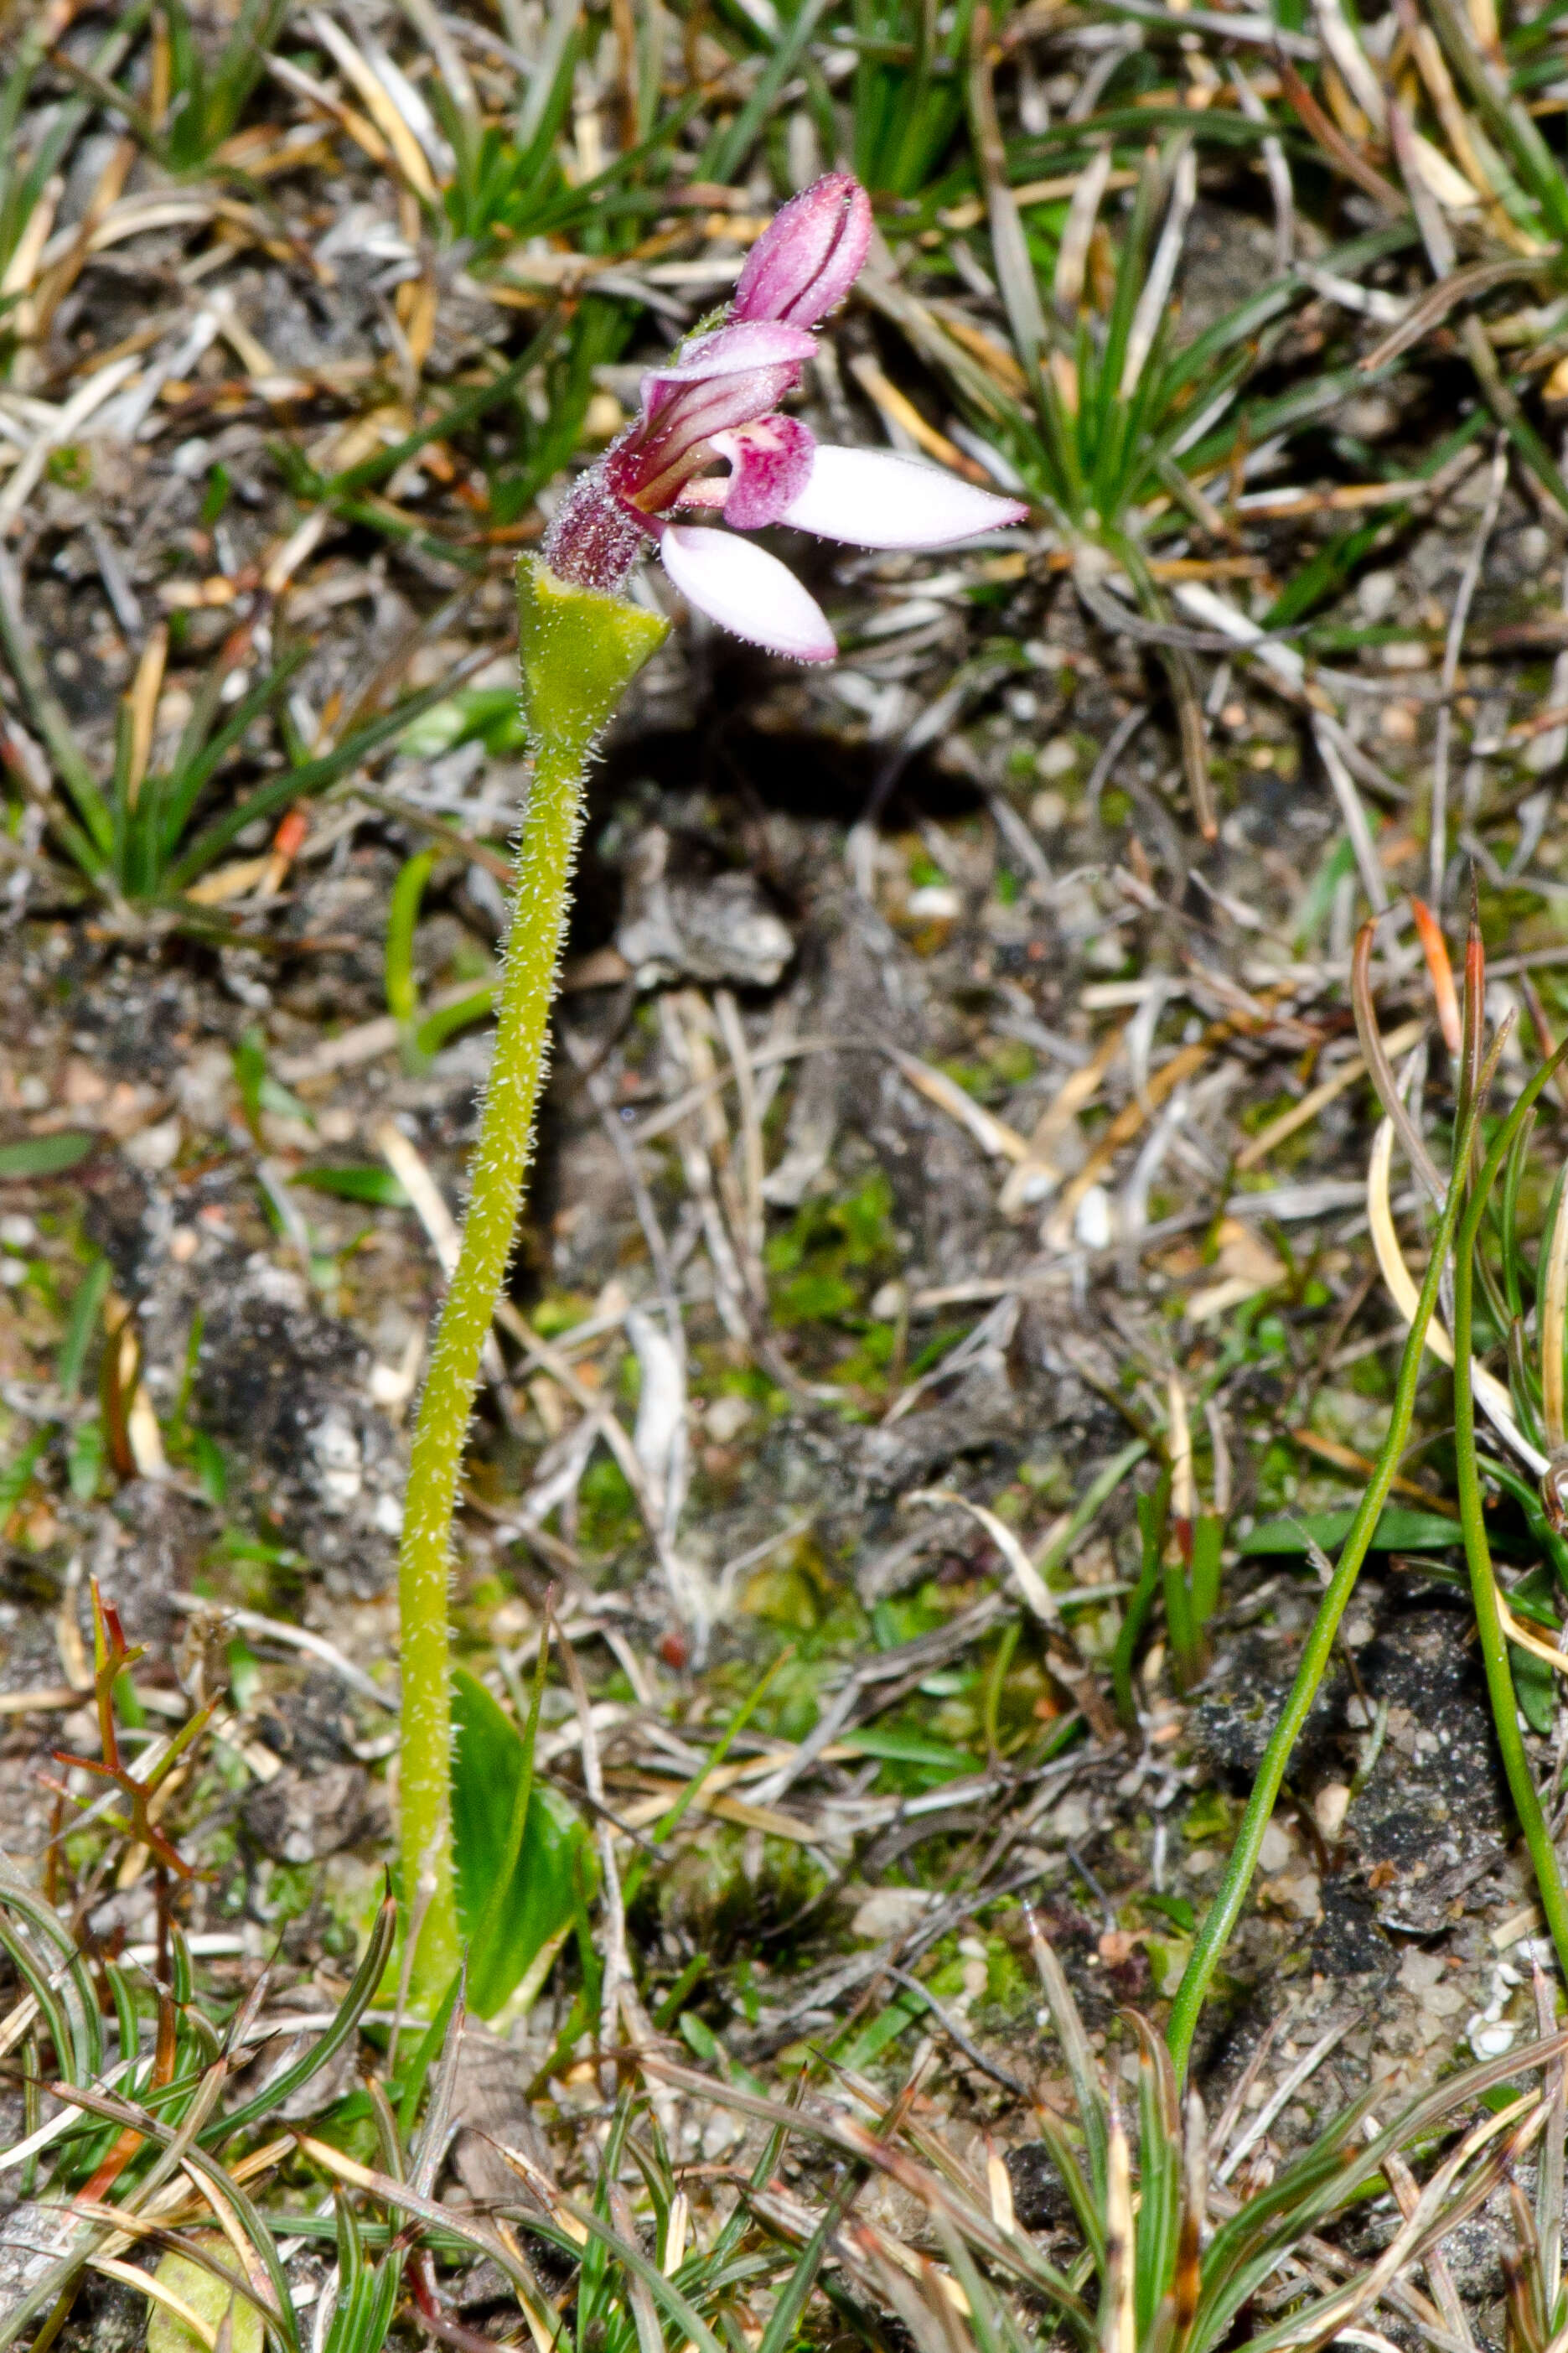 Image of Bunny orchids